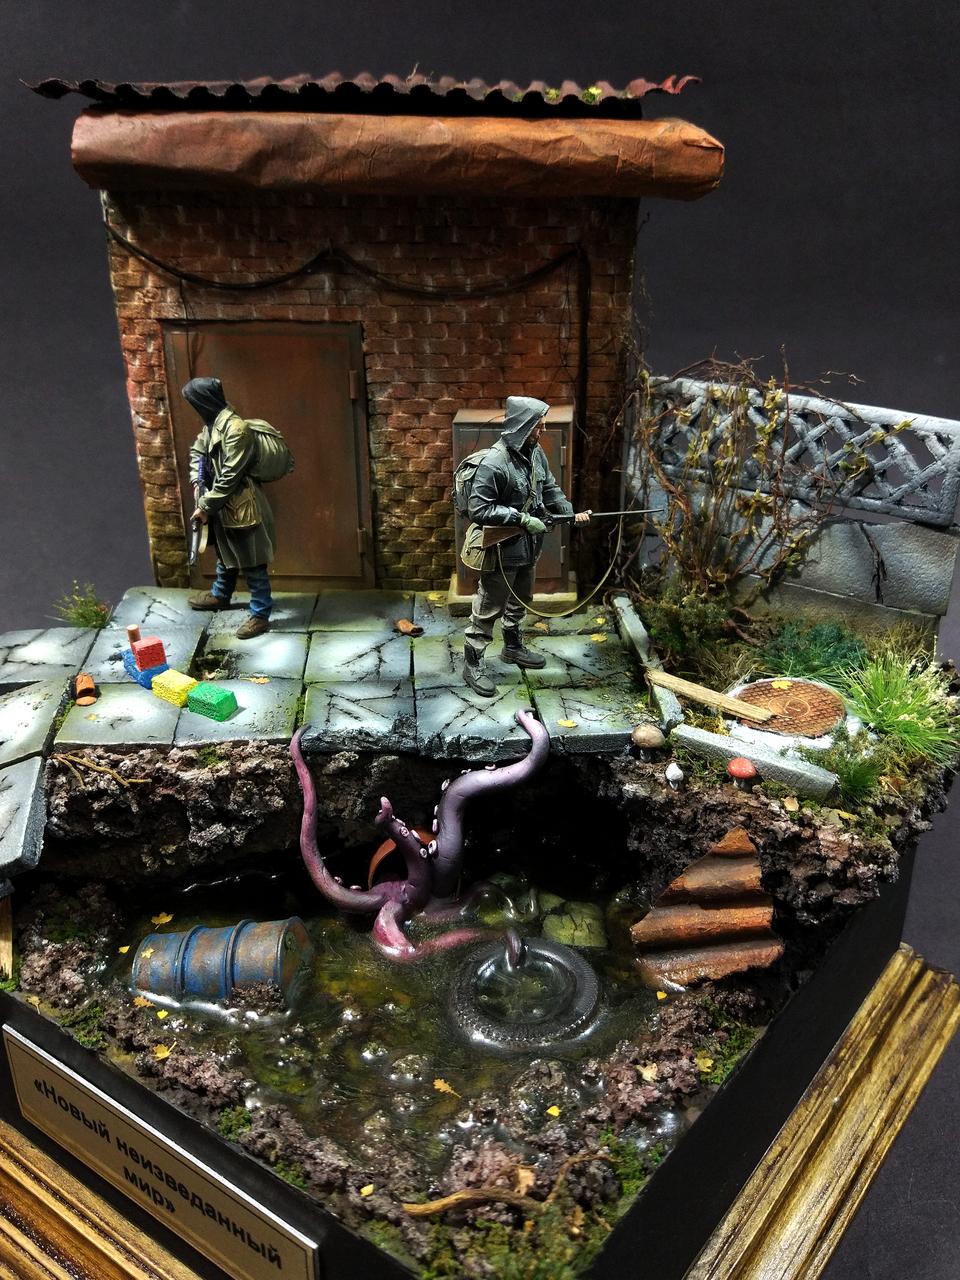 Dioramas and Vignettes: New undiscovered world, photo #8